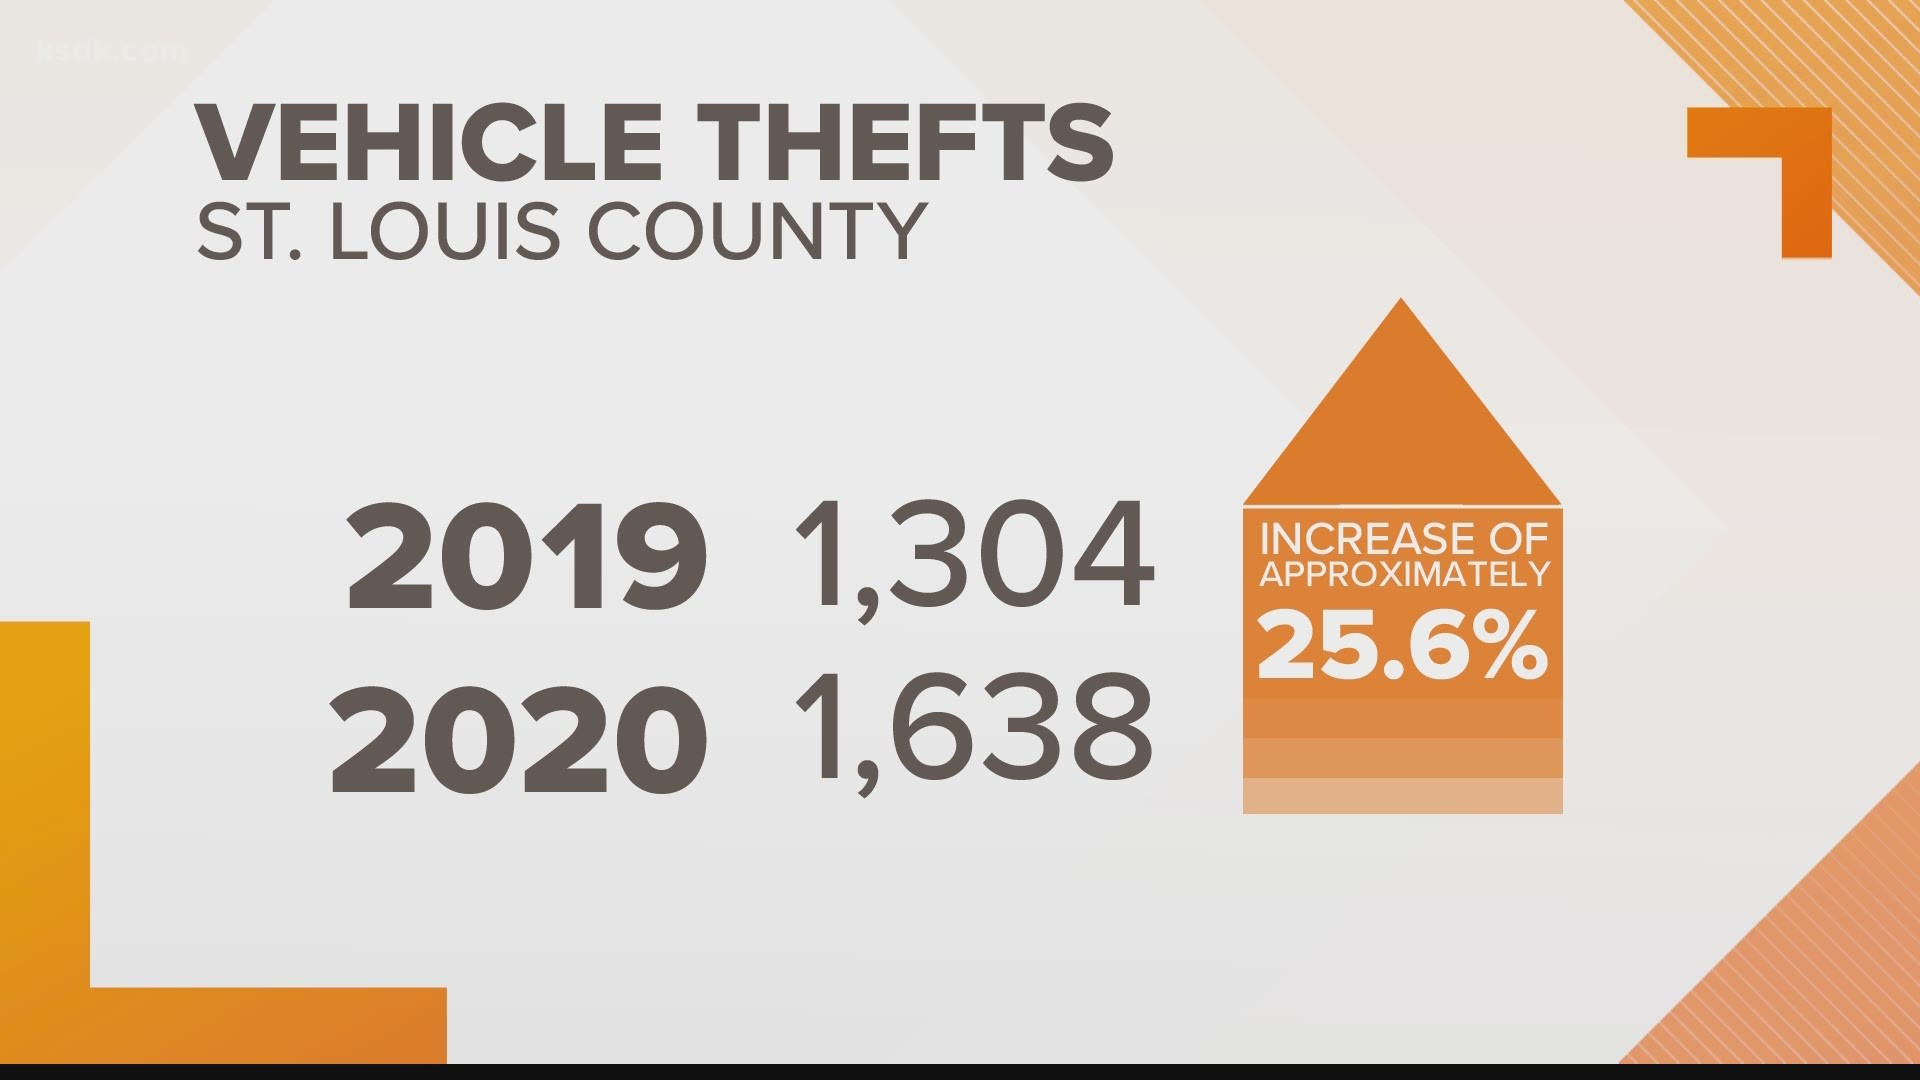 Police said the thieves are brazen and they're happening all over the area. They're especially worried about items taken from cars, including guns